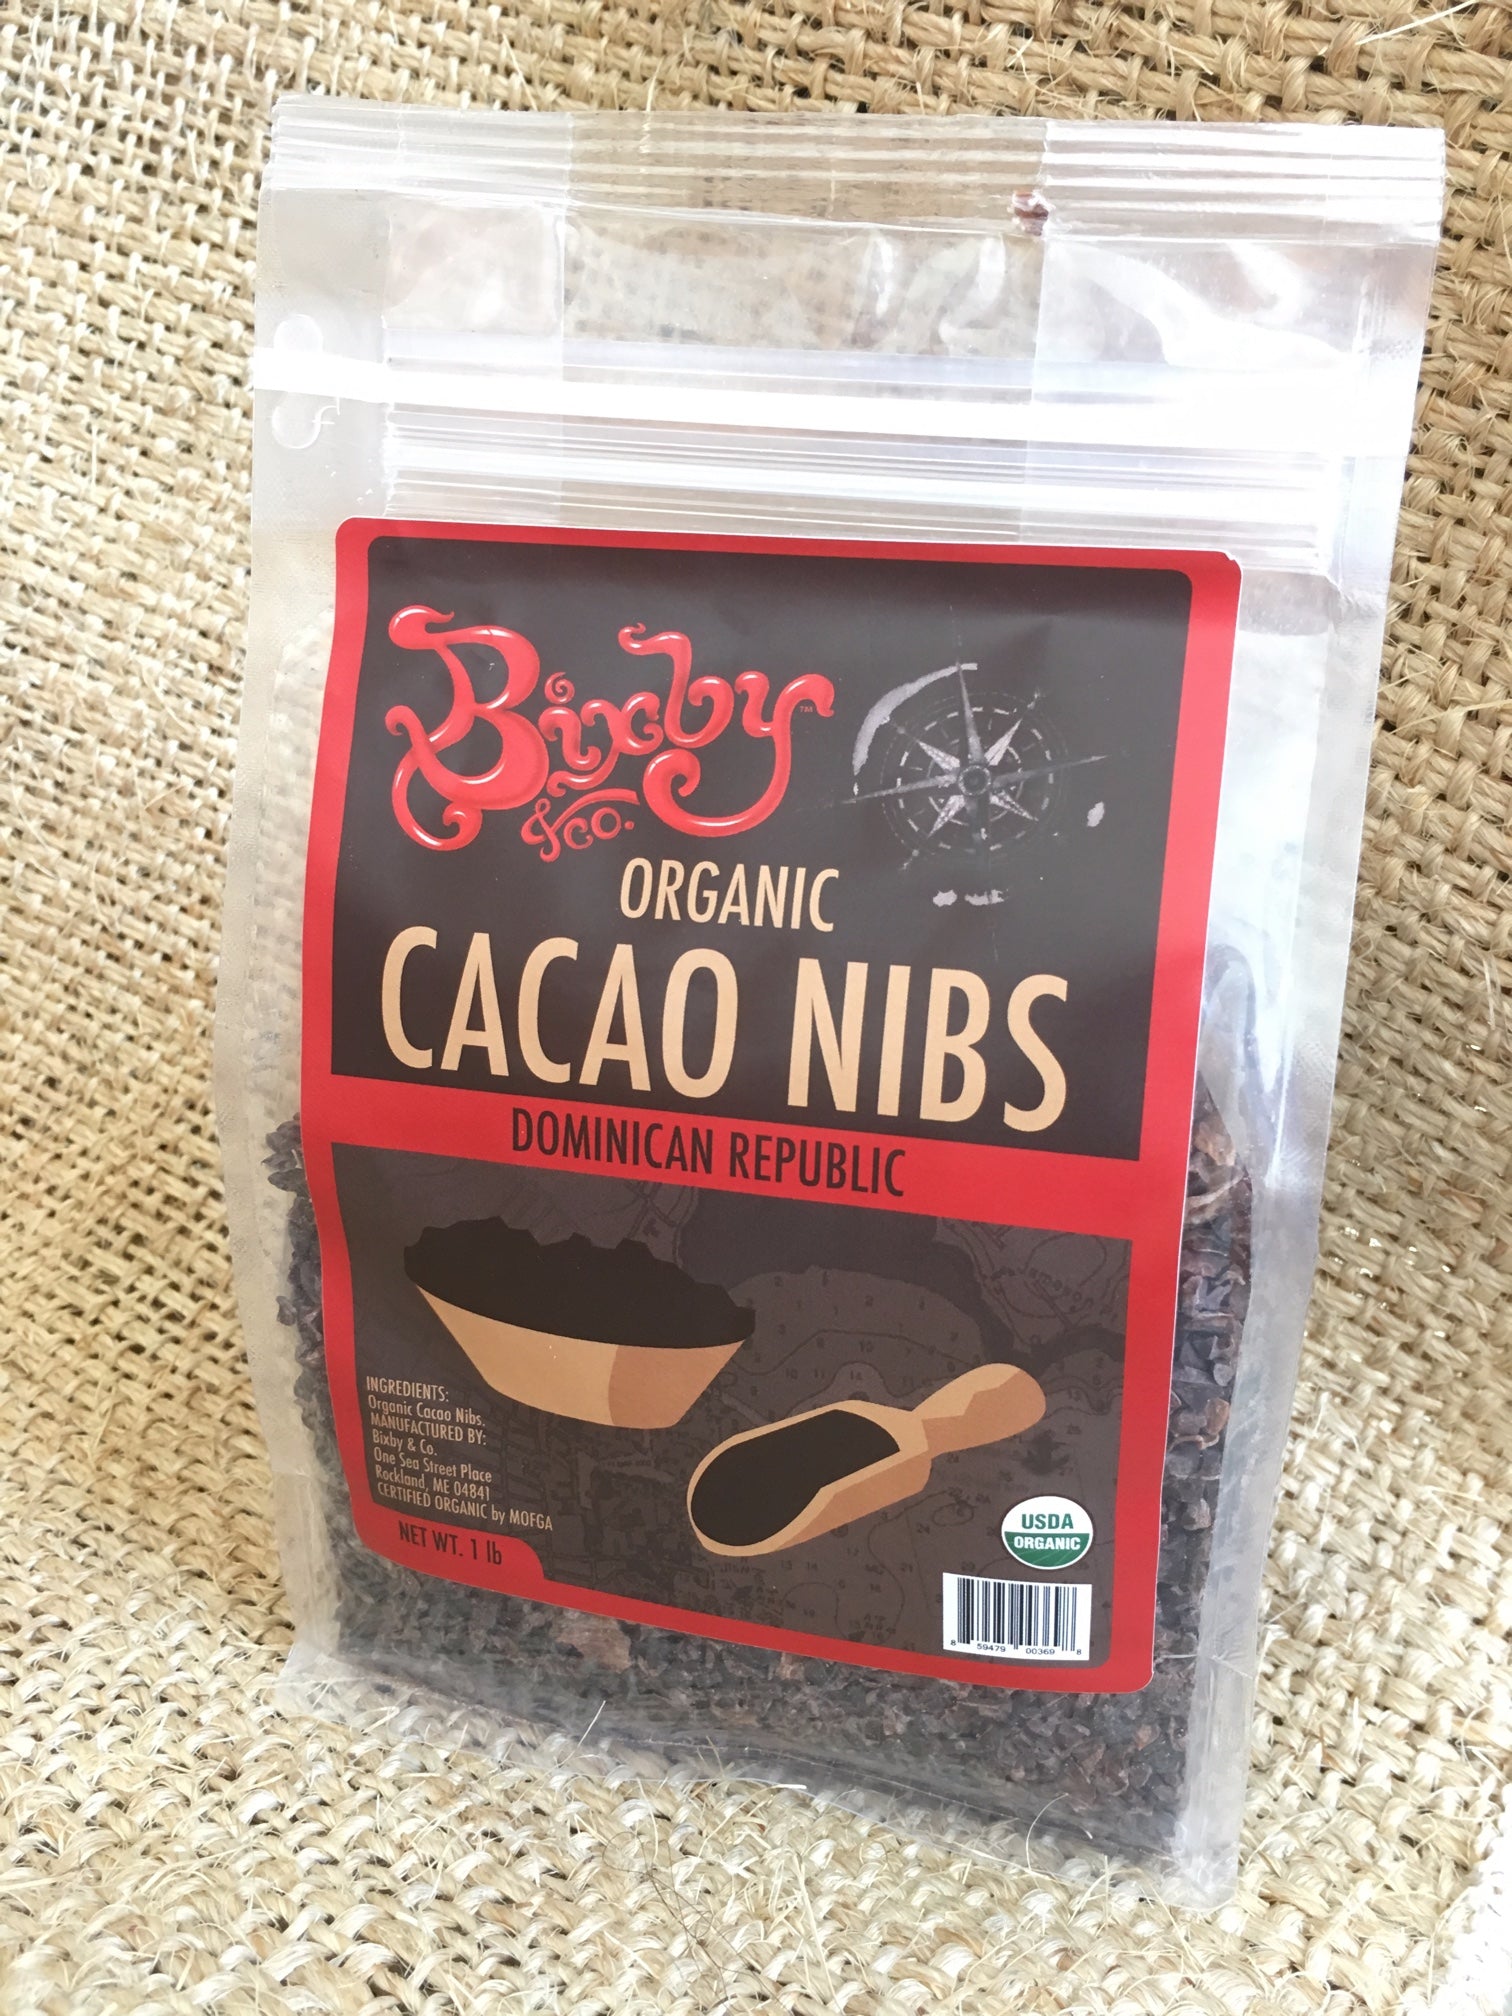 Cacao Nibs Announcement